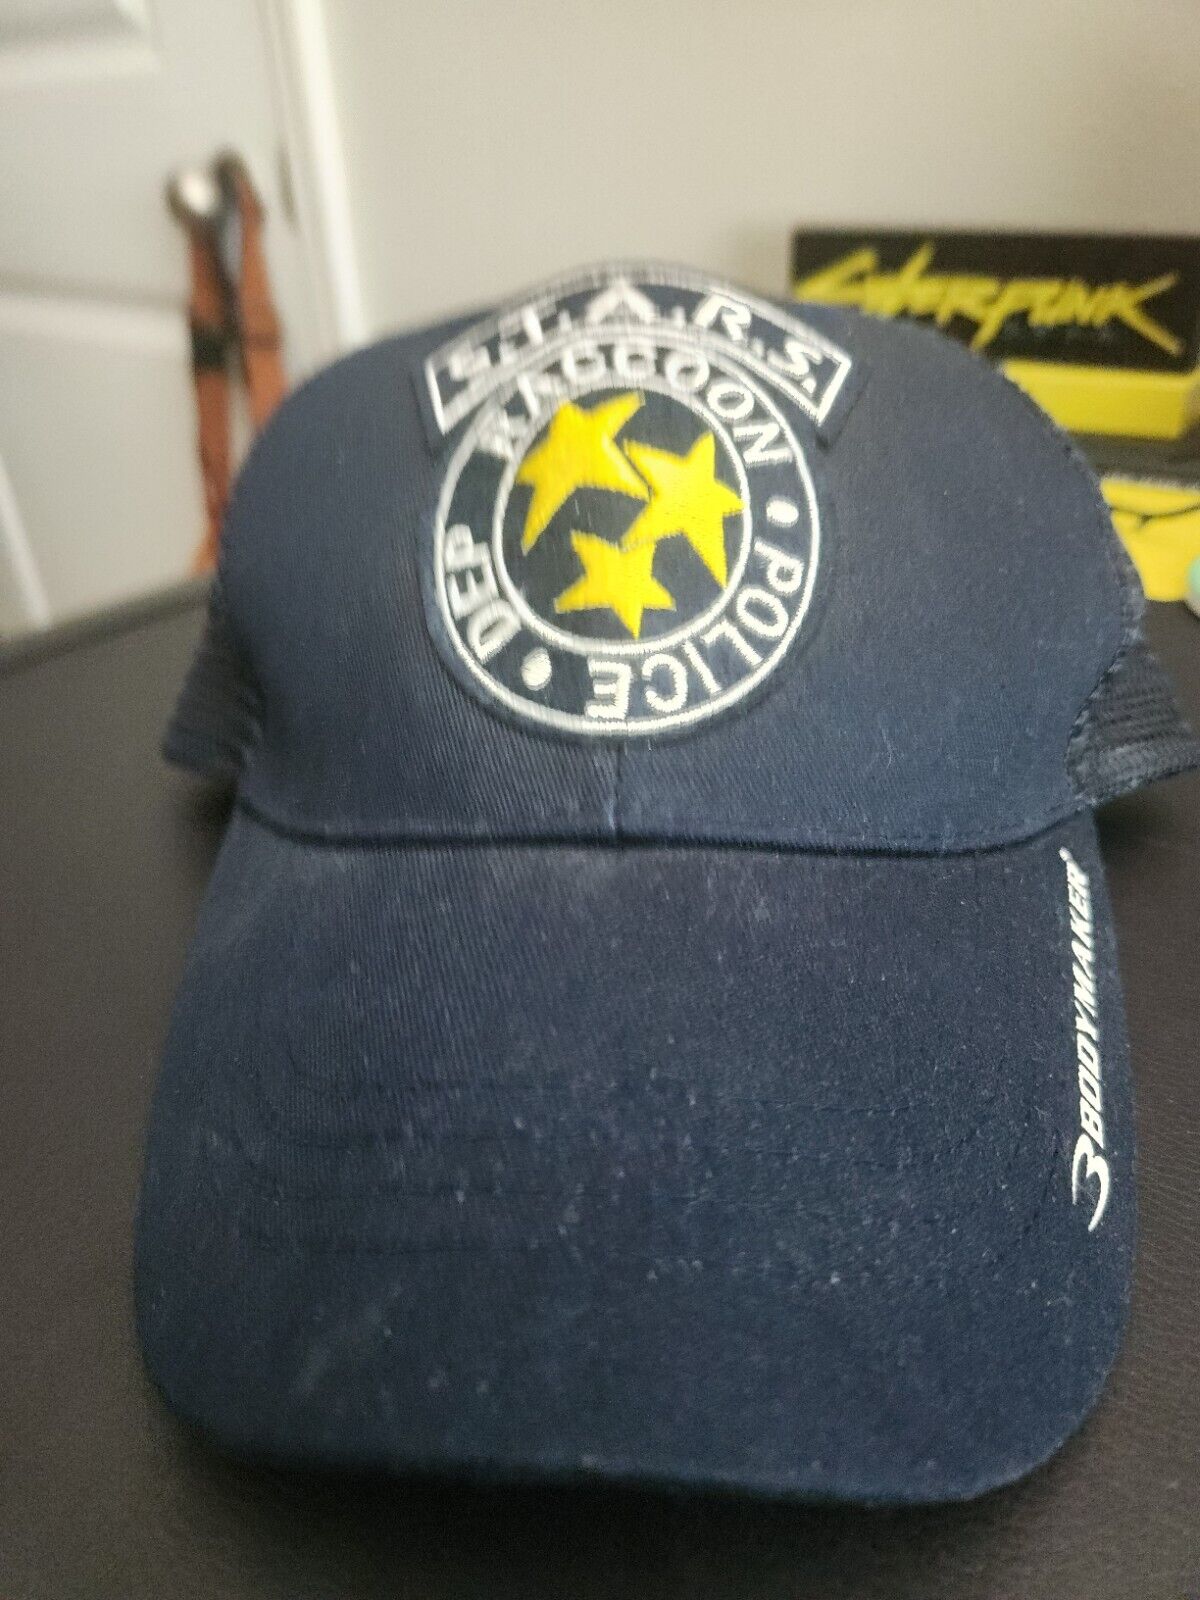 Biohazard/Resident Evil Mesh Cap made by BodyMaker S.T.A.R.S Rare Collectible